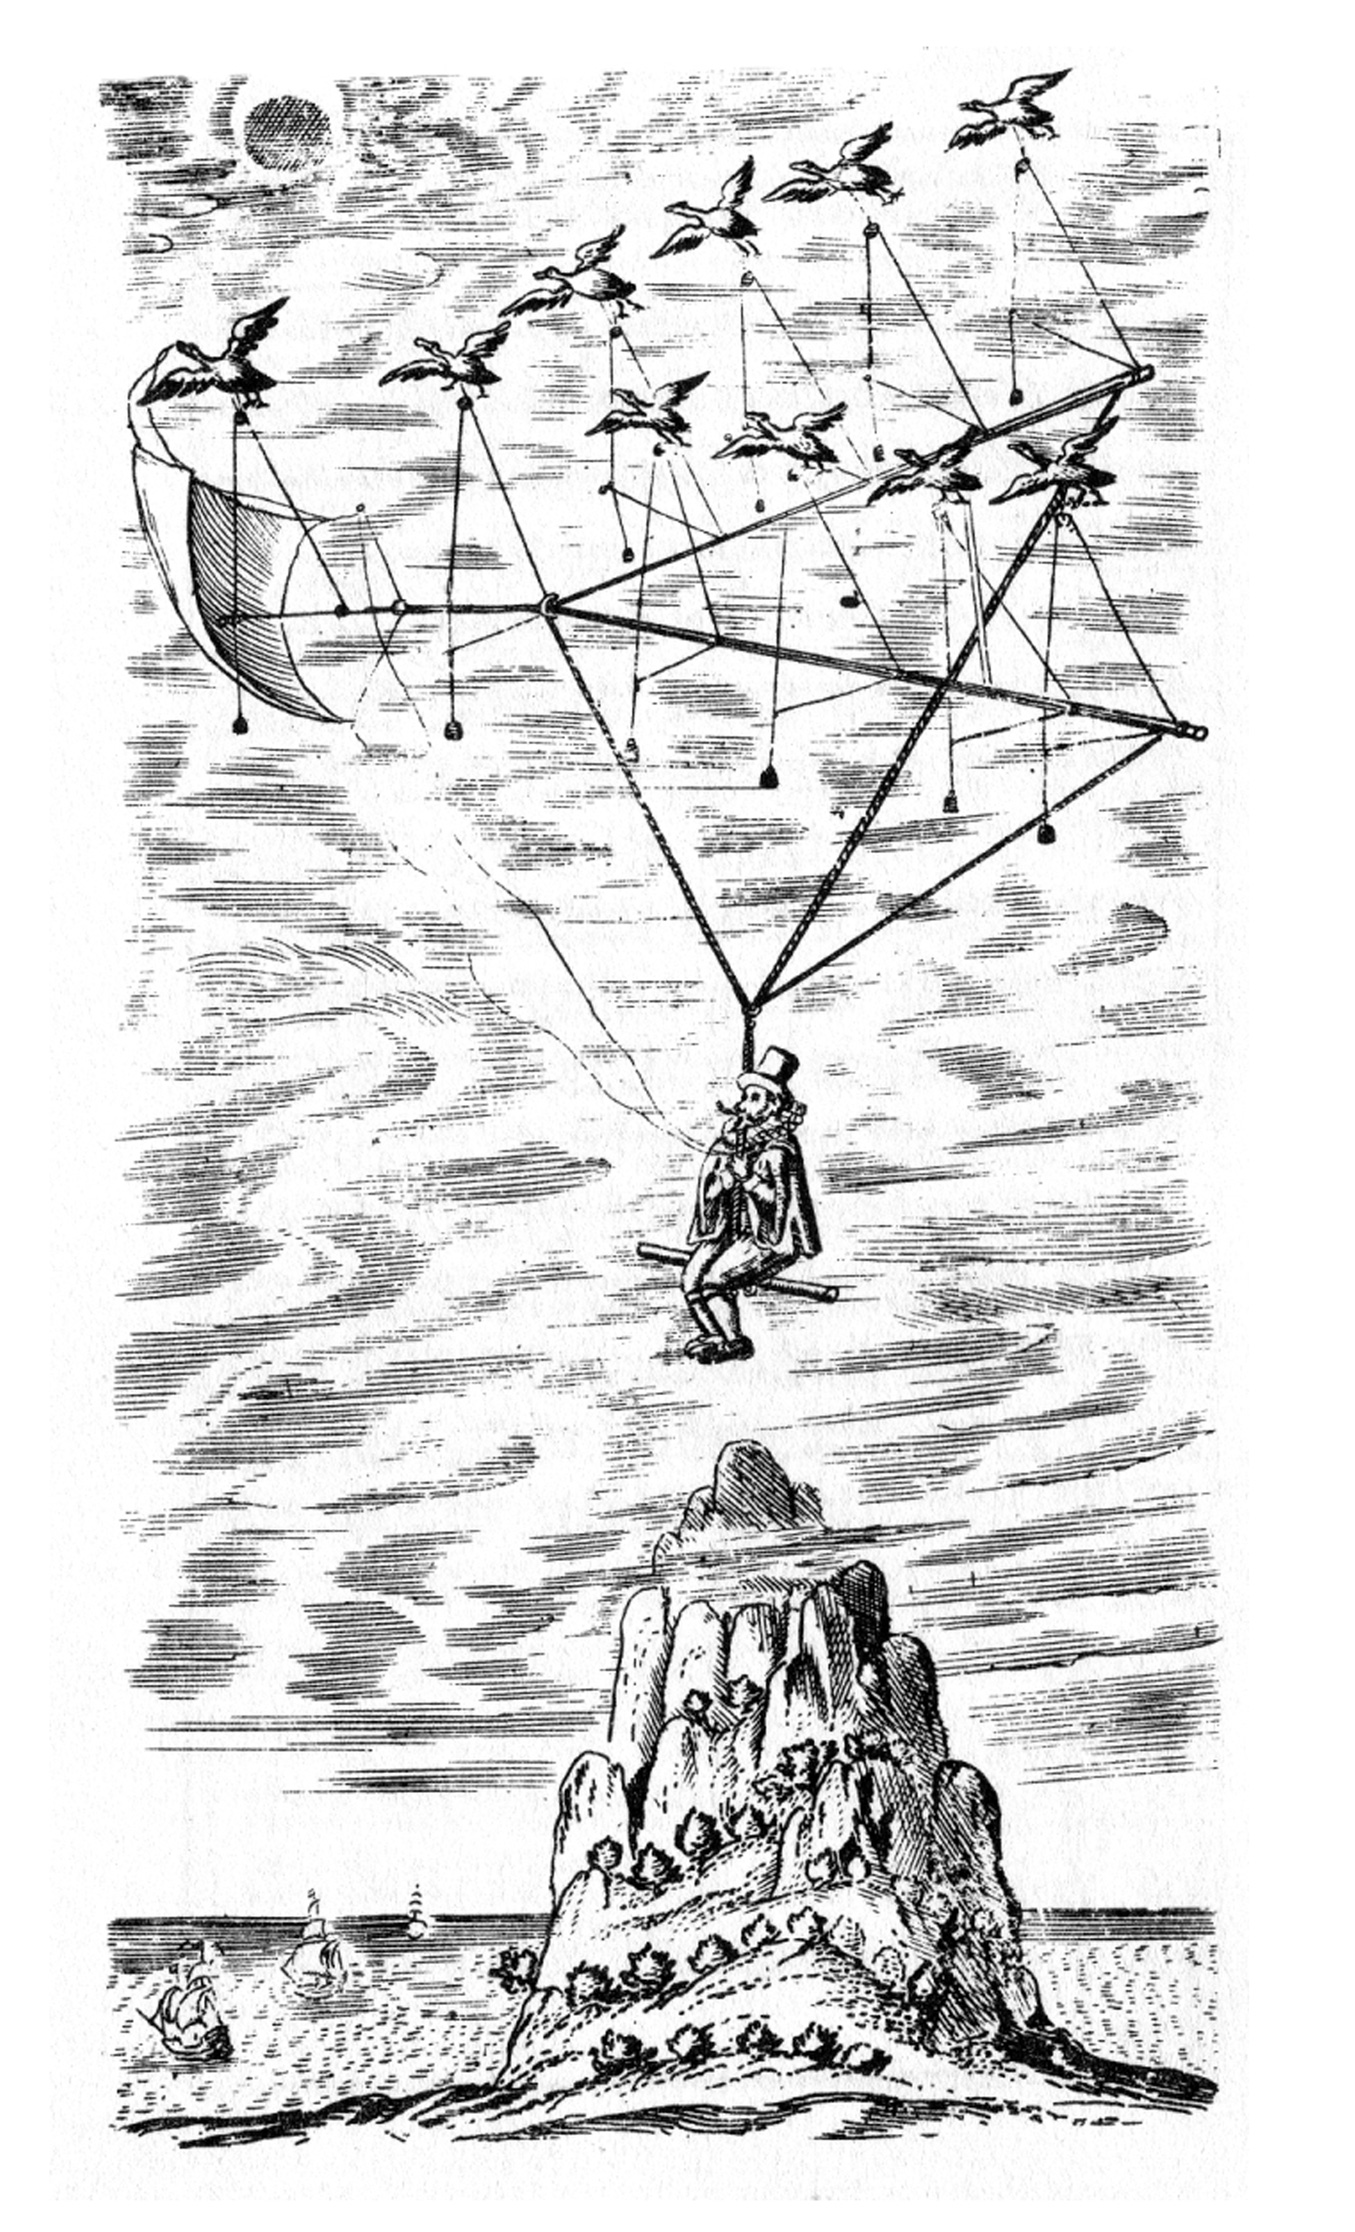 An illustration of Godwin’s scheme for a bird-powered flying machine, from his sixteen thirty eight book “The Man on the Moone, or, A Discourse of a Voyage Thither.”